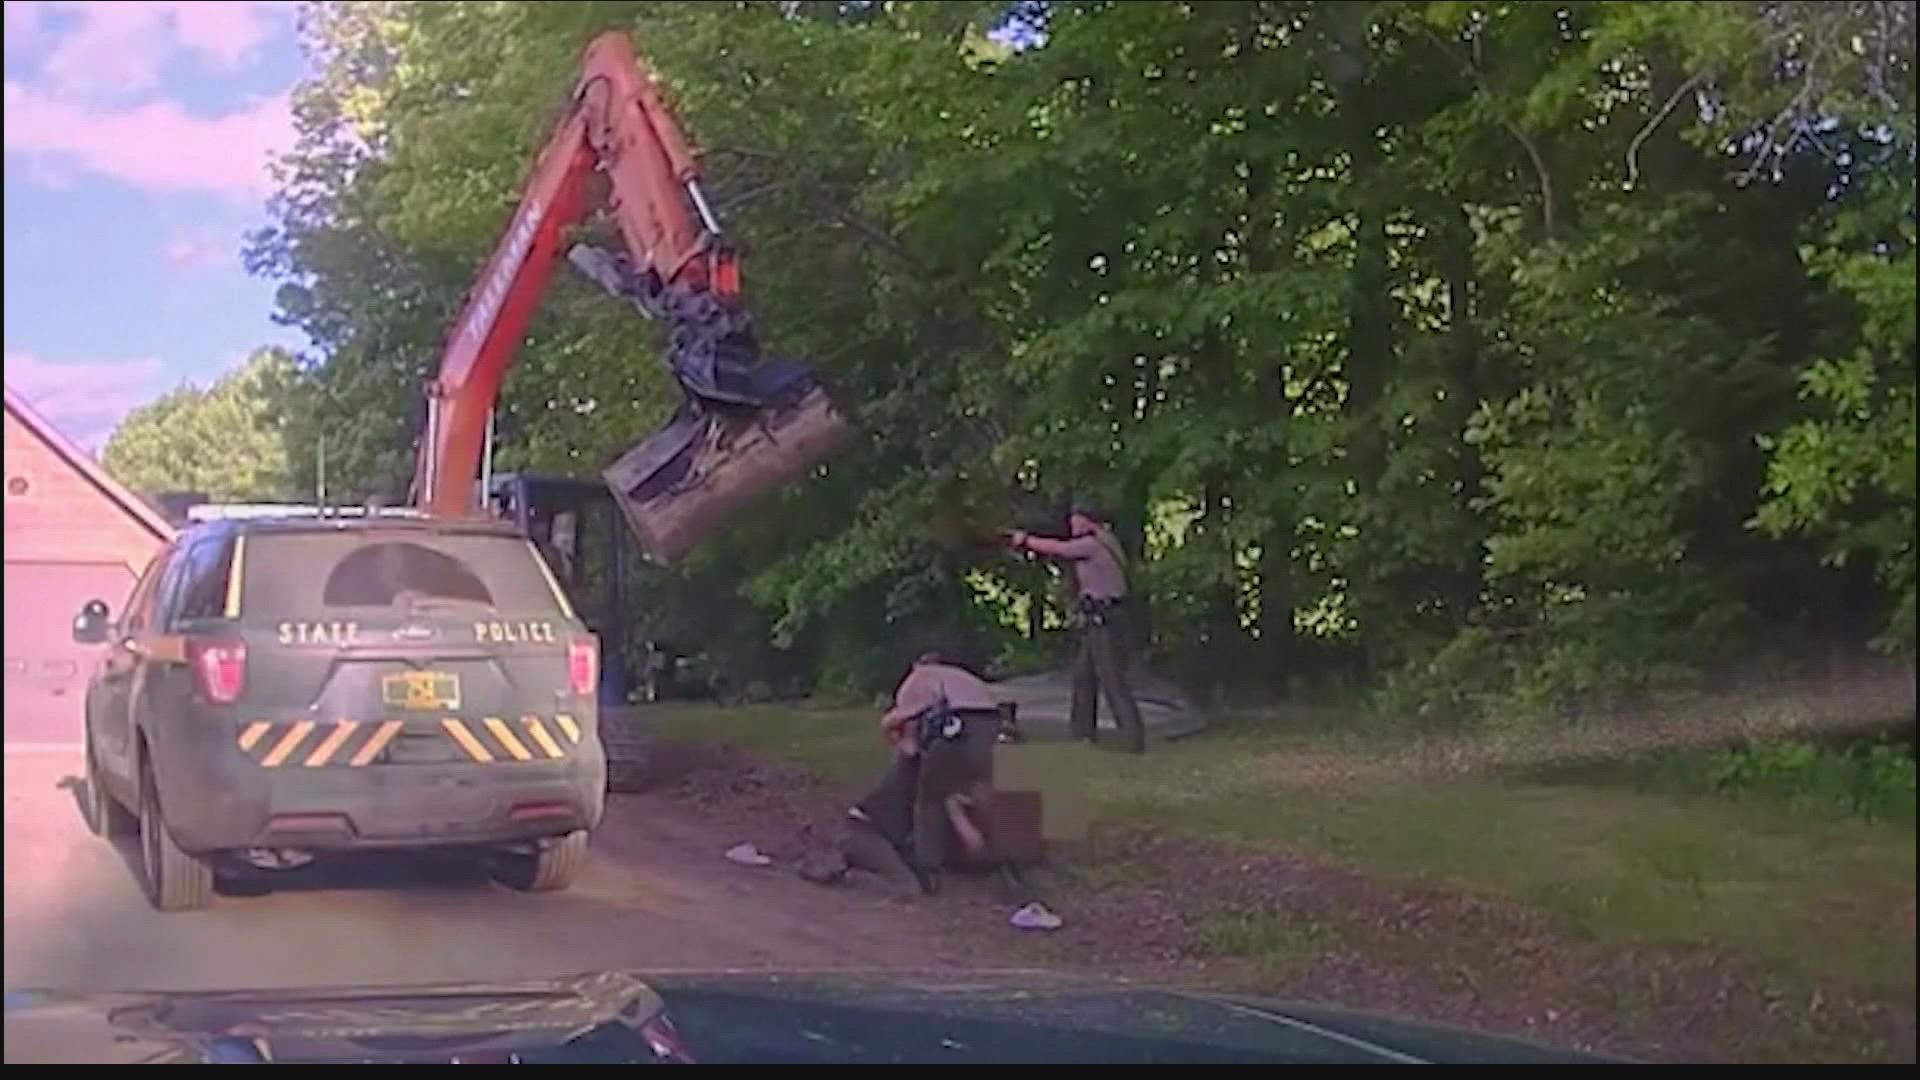 Vermont troopers showed up to take a man into custody when his dad tried to wack officials with the excavator.